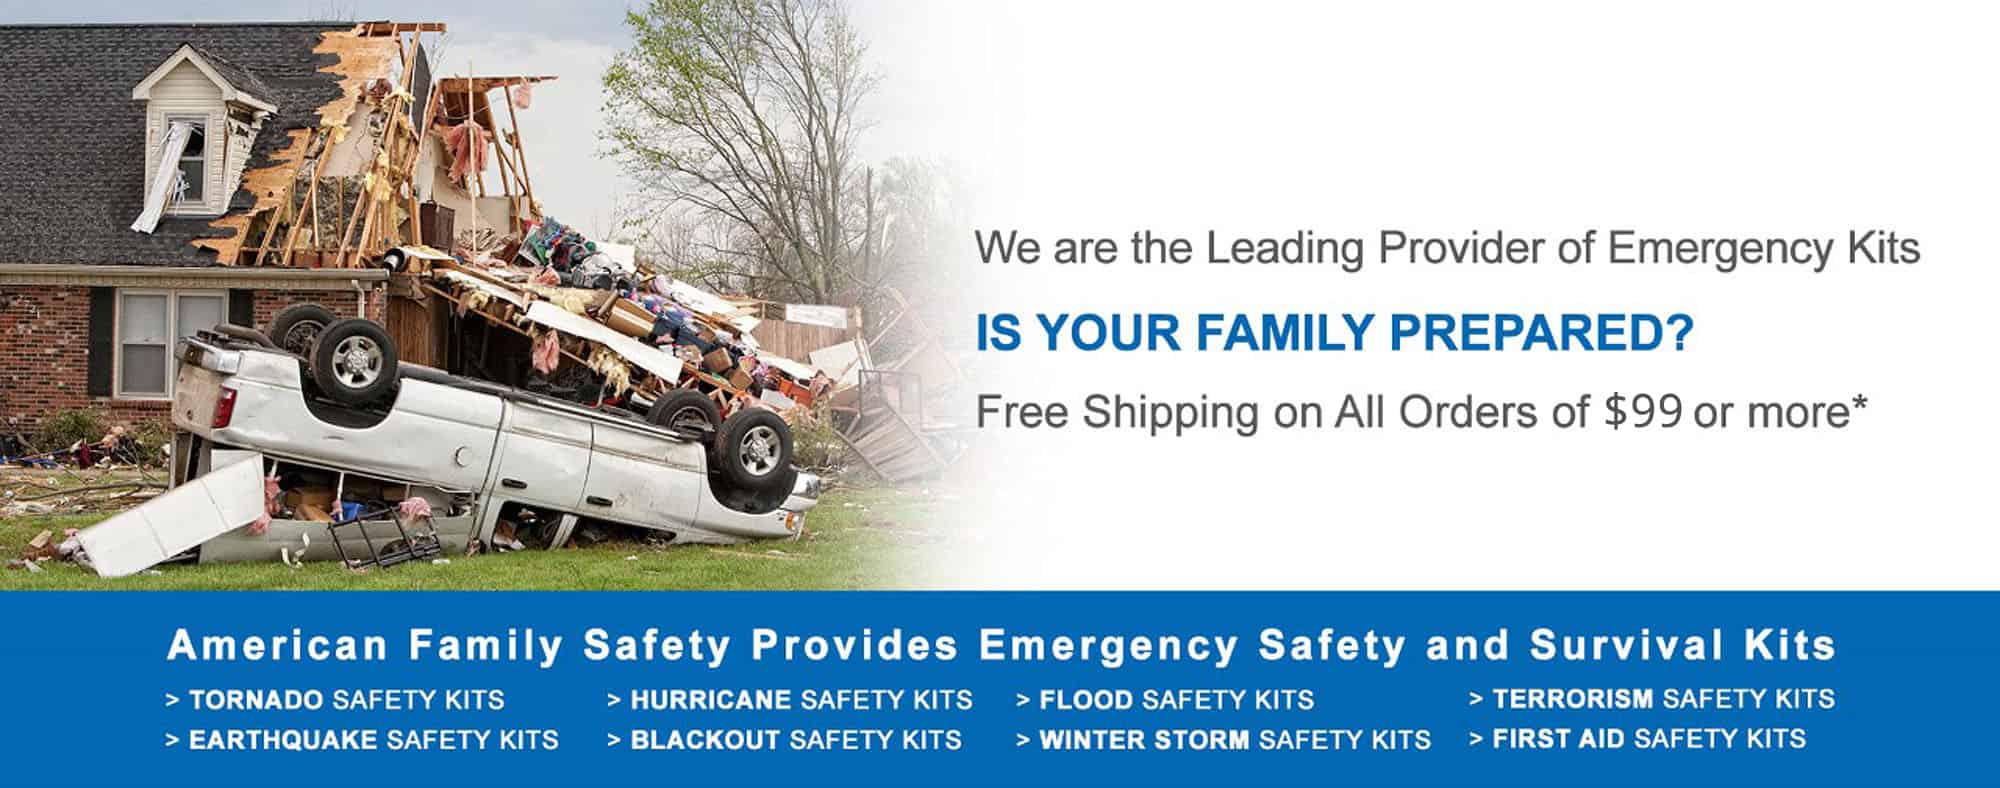 American Family Safety is a leading provider of Emergency Kits